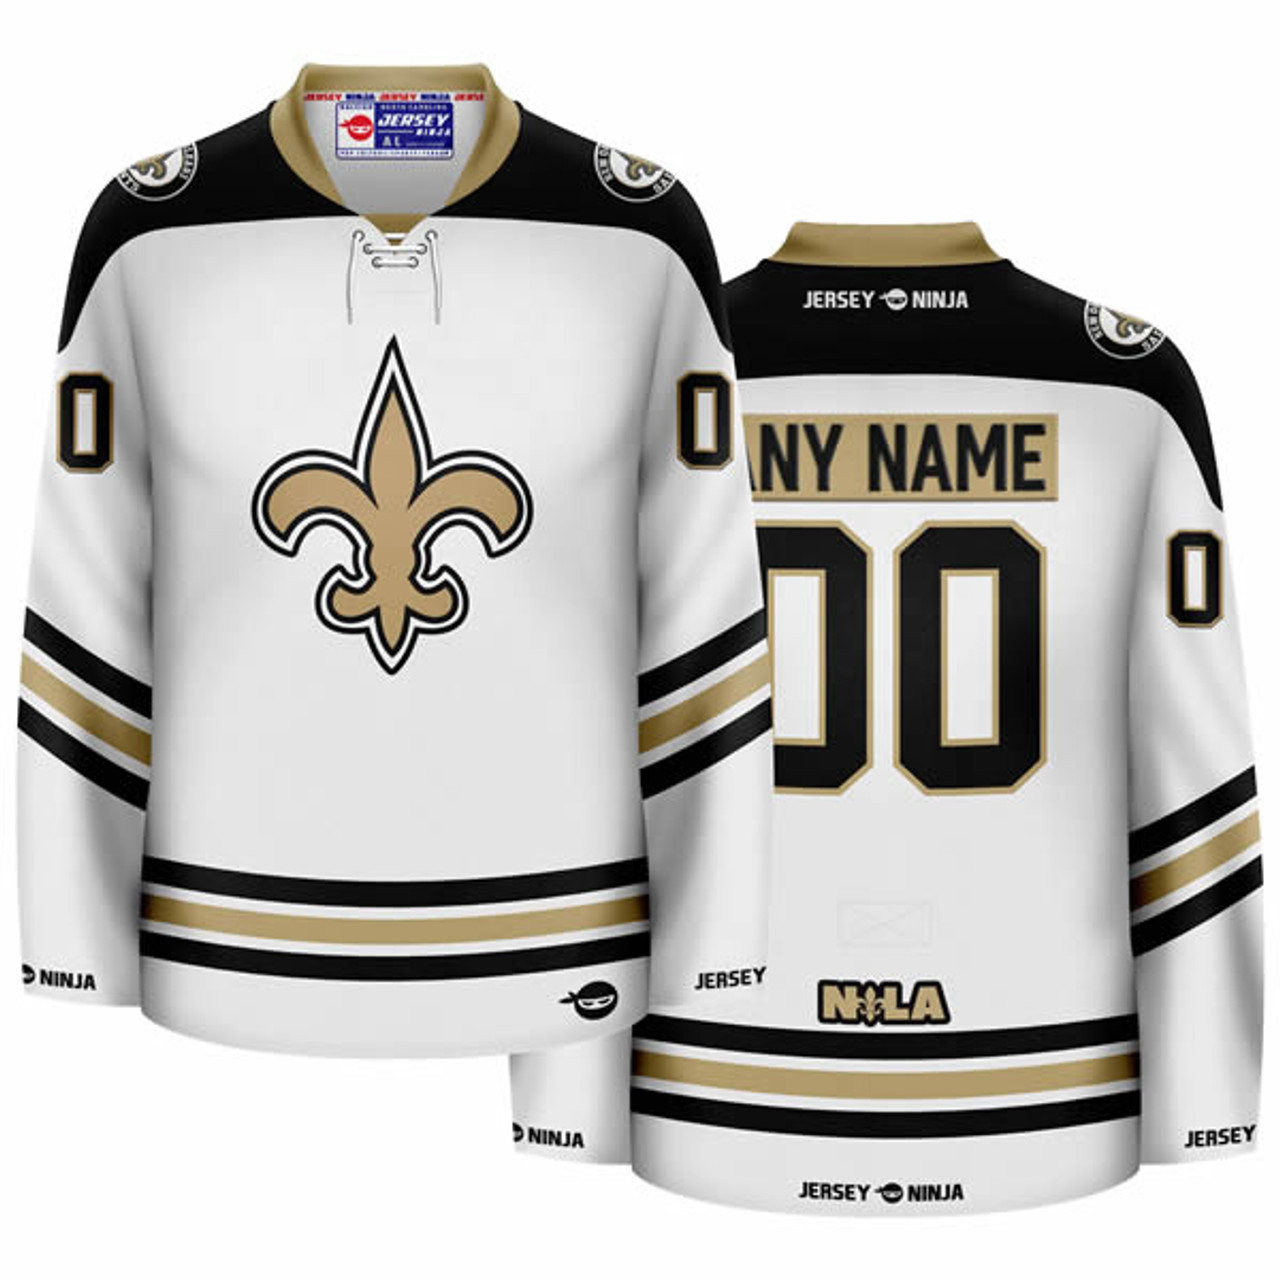 white and gold saints jersey